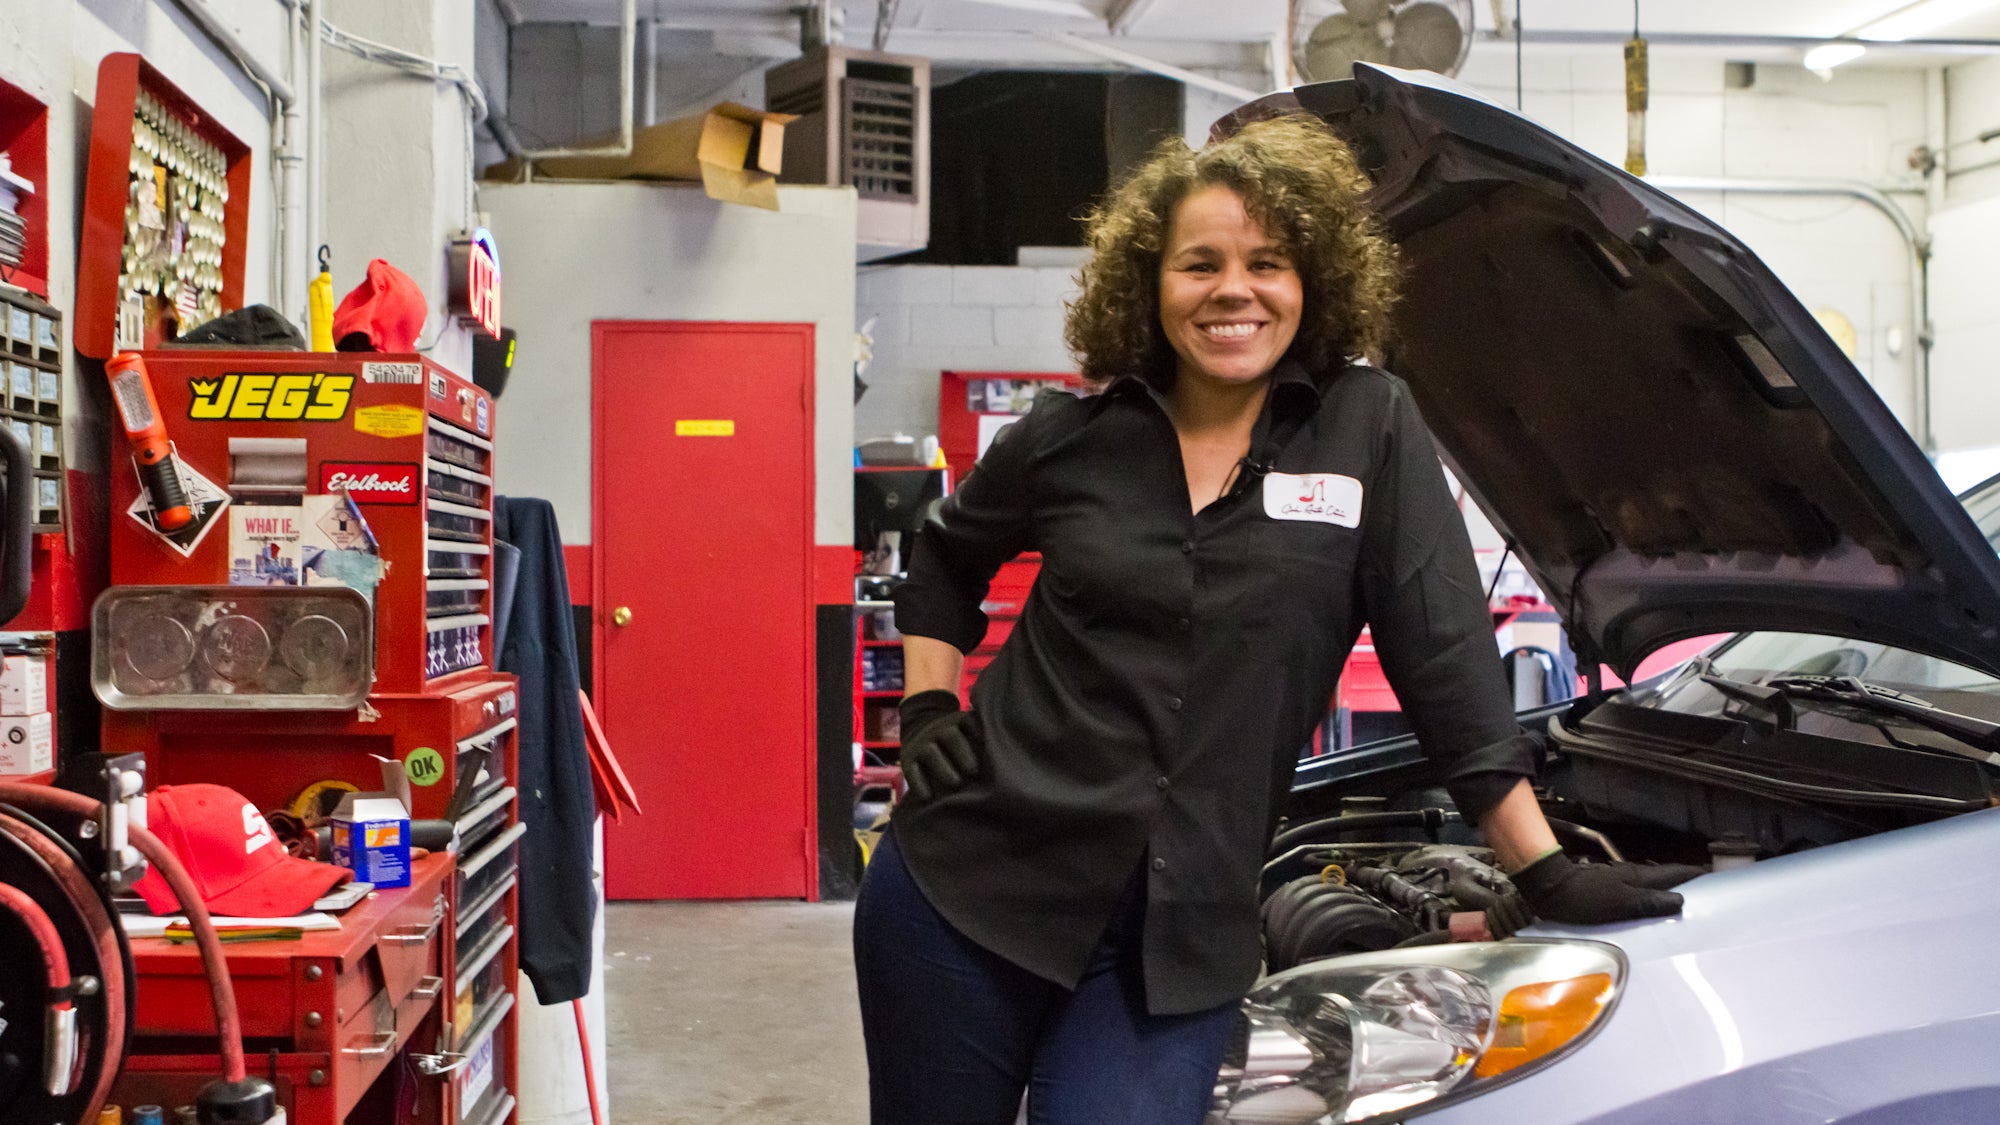 Patrice Banks is the owner of The Girls Auto Clinic Repair Center which caters to women and aims to empower them. (Kimberly Paynter/WHYY)